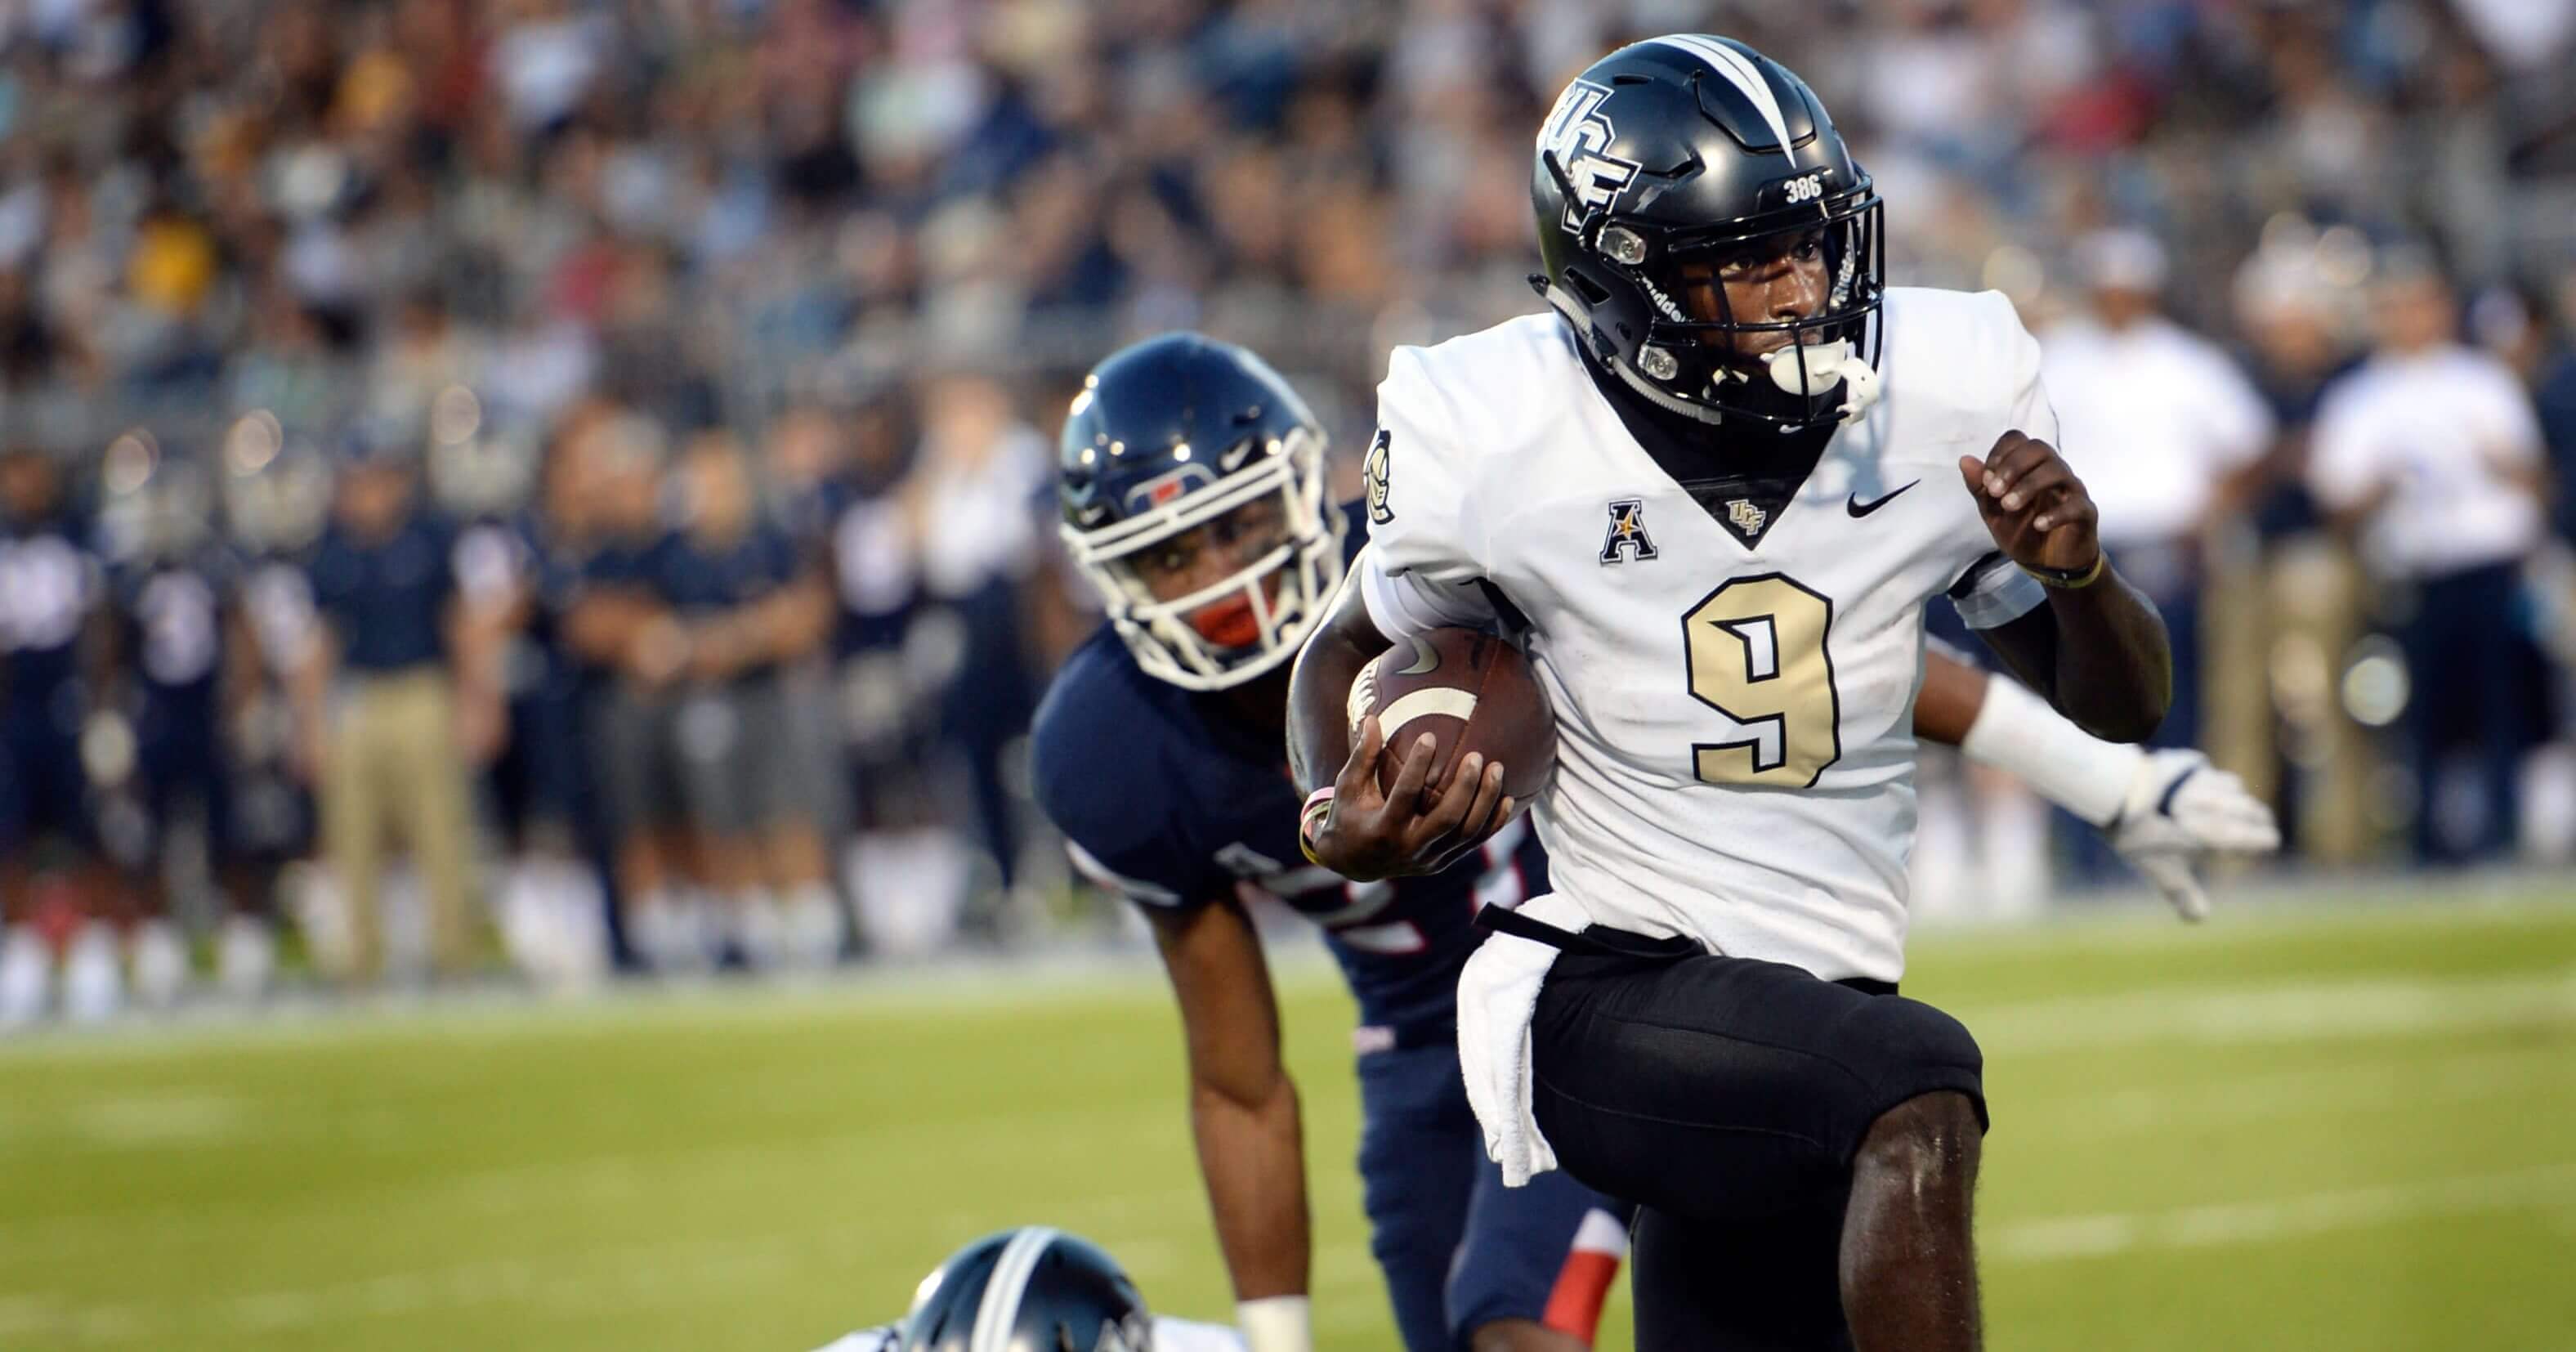 Central Florida running back Adrian Killins Jr. (9) runs the ball in for a touchdown during the first half of an NCAA college football game against Connecticut on Thursday in East Hartford, Conn.